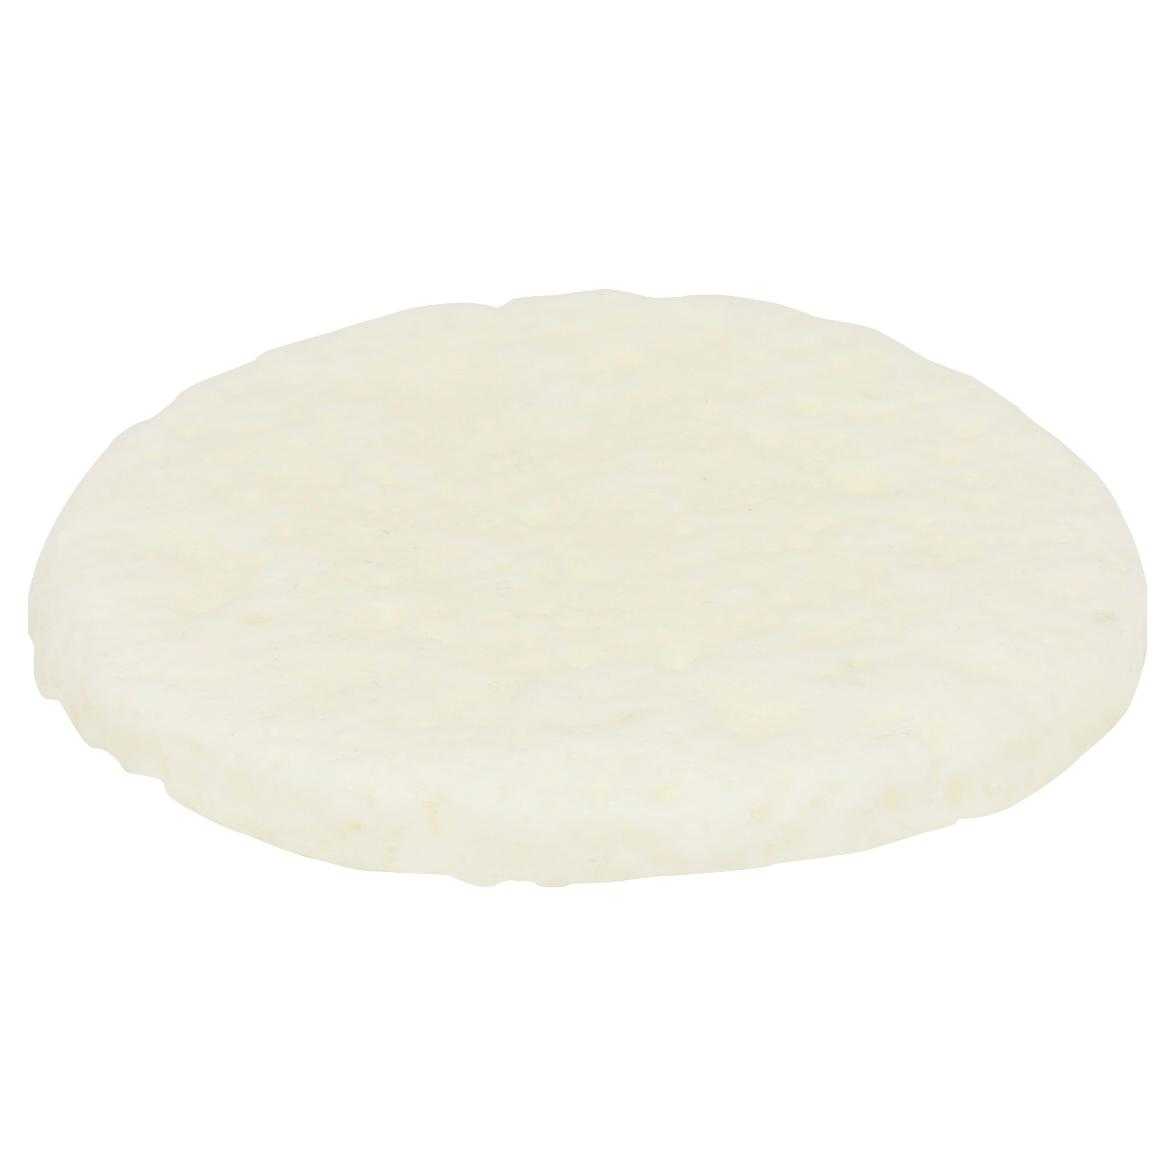 Papetti’s® Fully-Cooked 3.5” Puffed Round Egg White Patties, 160/1.75 oz